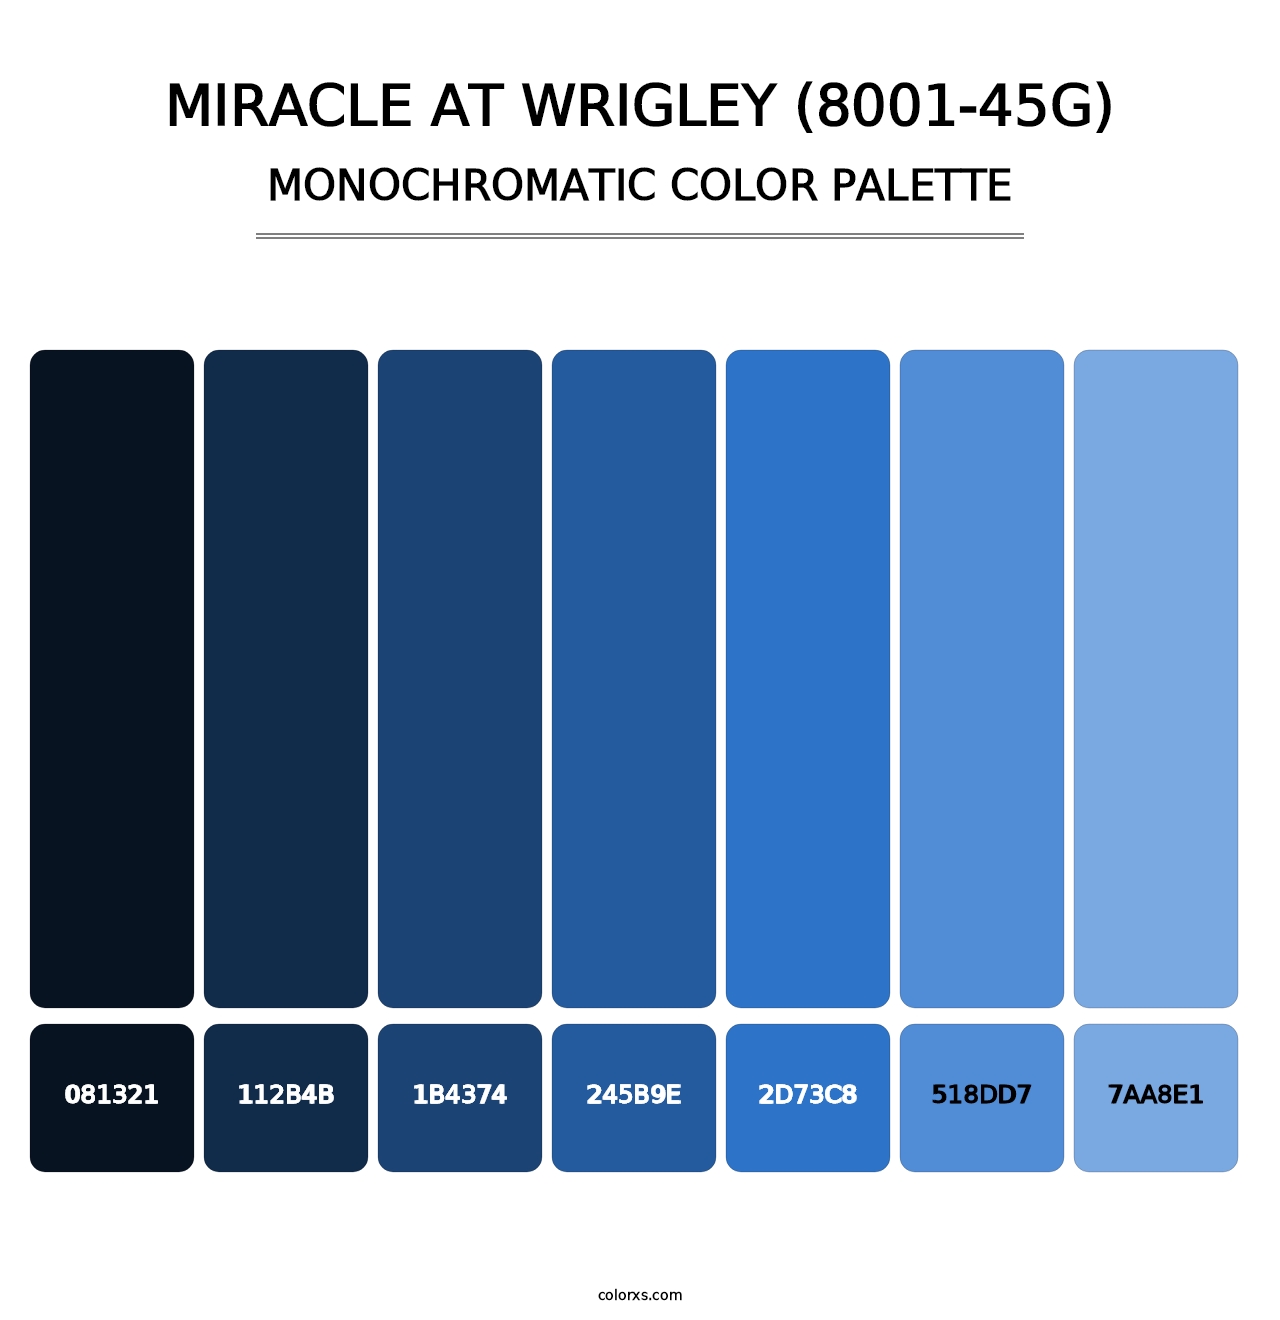 Miracle at Wrigley (8001-45G) - Monochromatic Color Palette